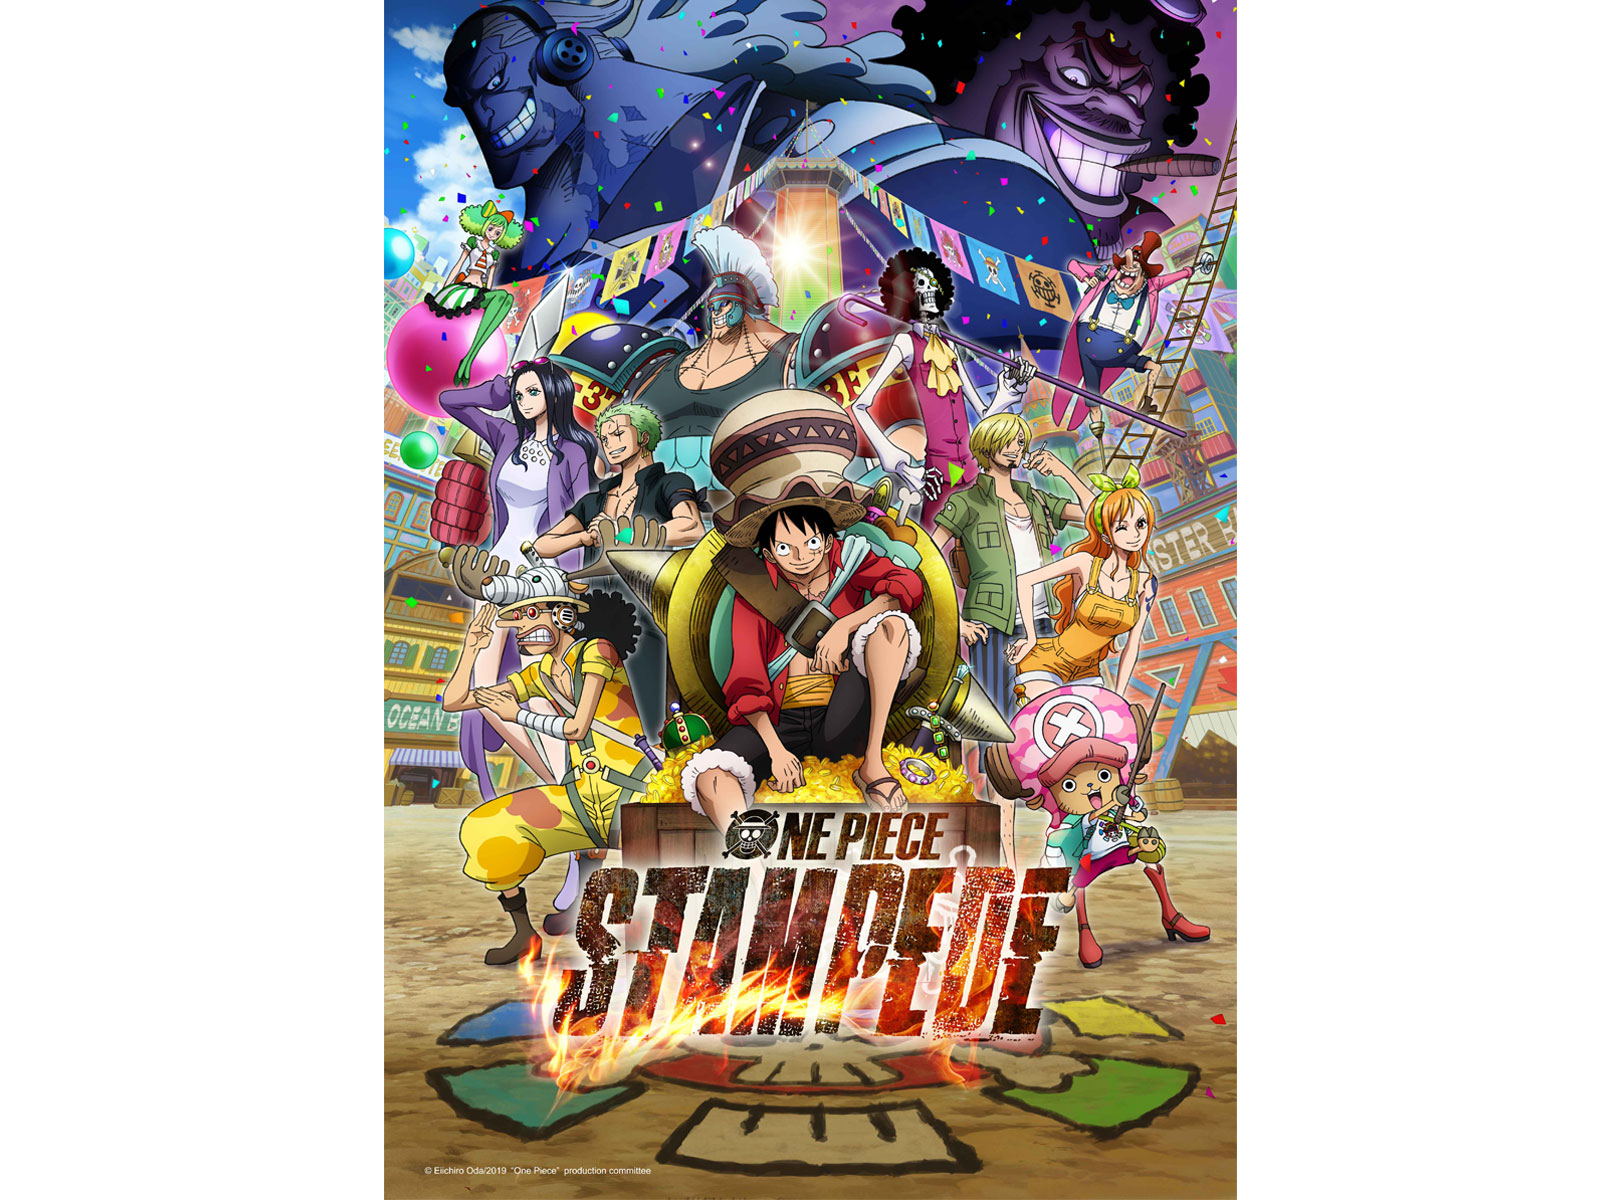 ONE PIECE: STAMPEDE WILL CHARGE INTO THEATERS THROUGHOUT THE U.S. & CANADA IN OCTOBER